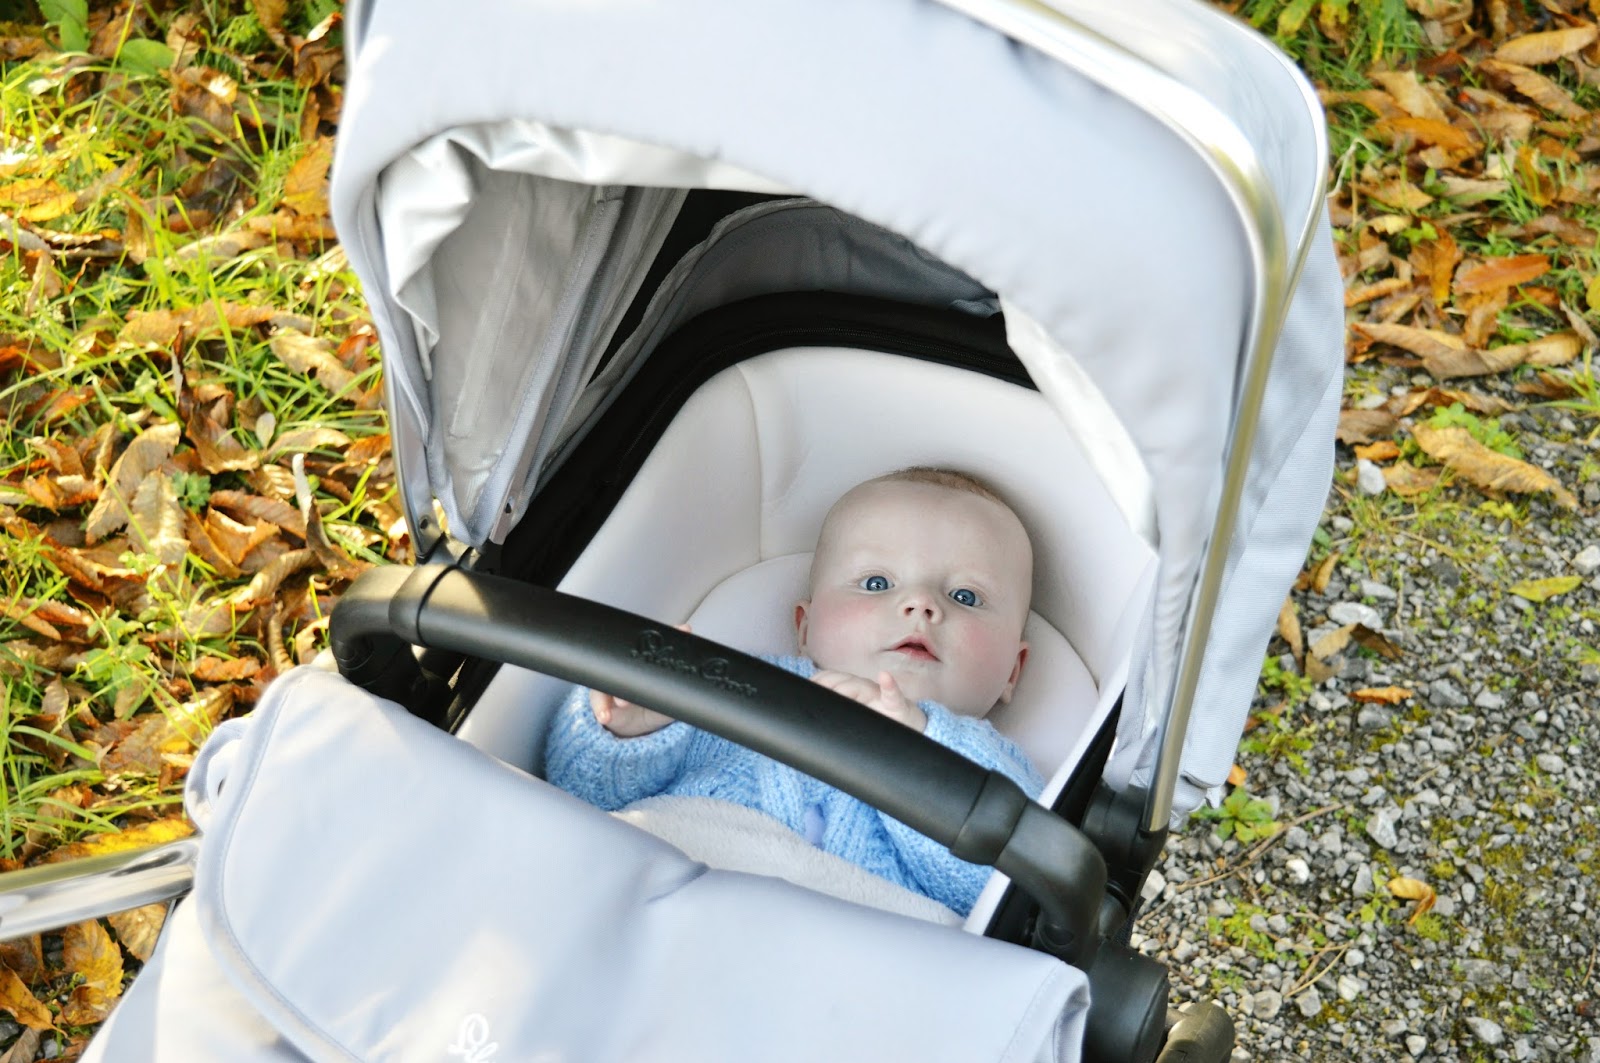 silver cross pioneer carrycot